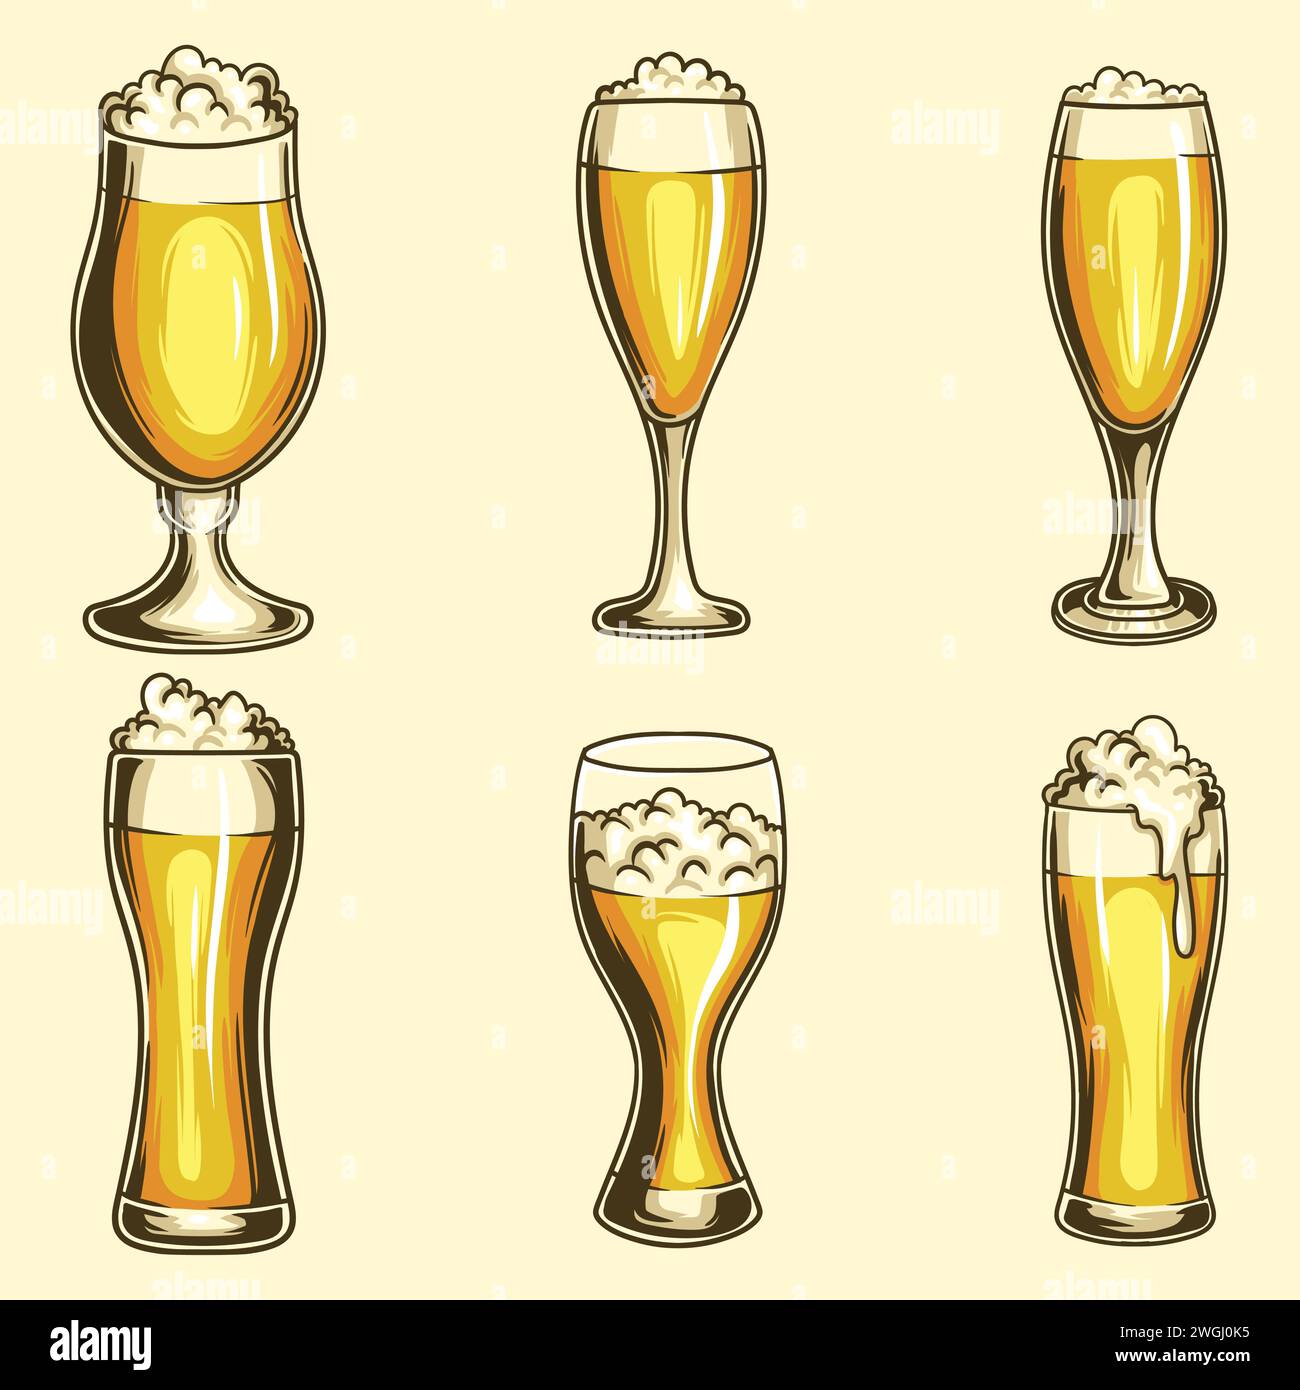 Glass pale ale beer set collection vector illustration for your company or brand Stock Vector